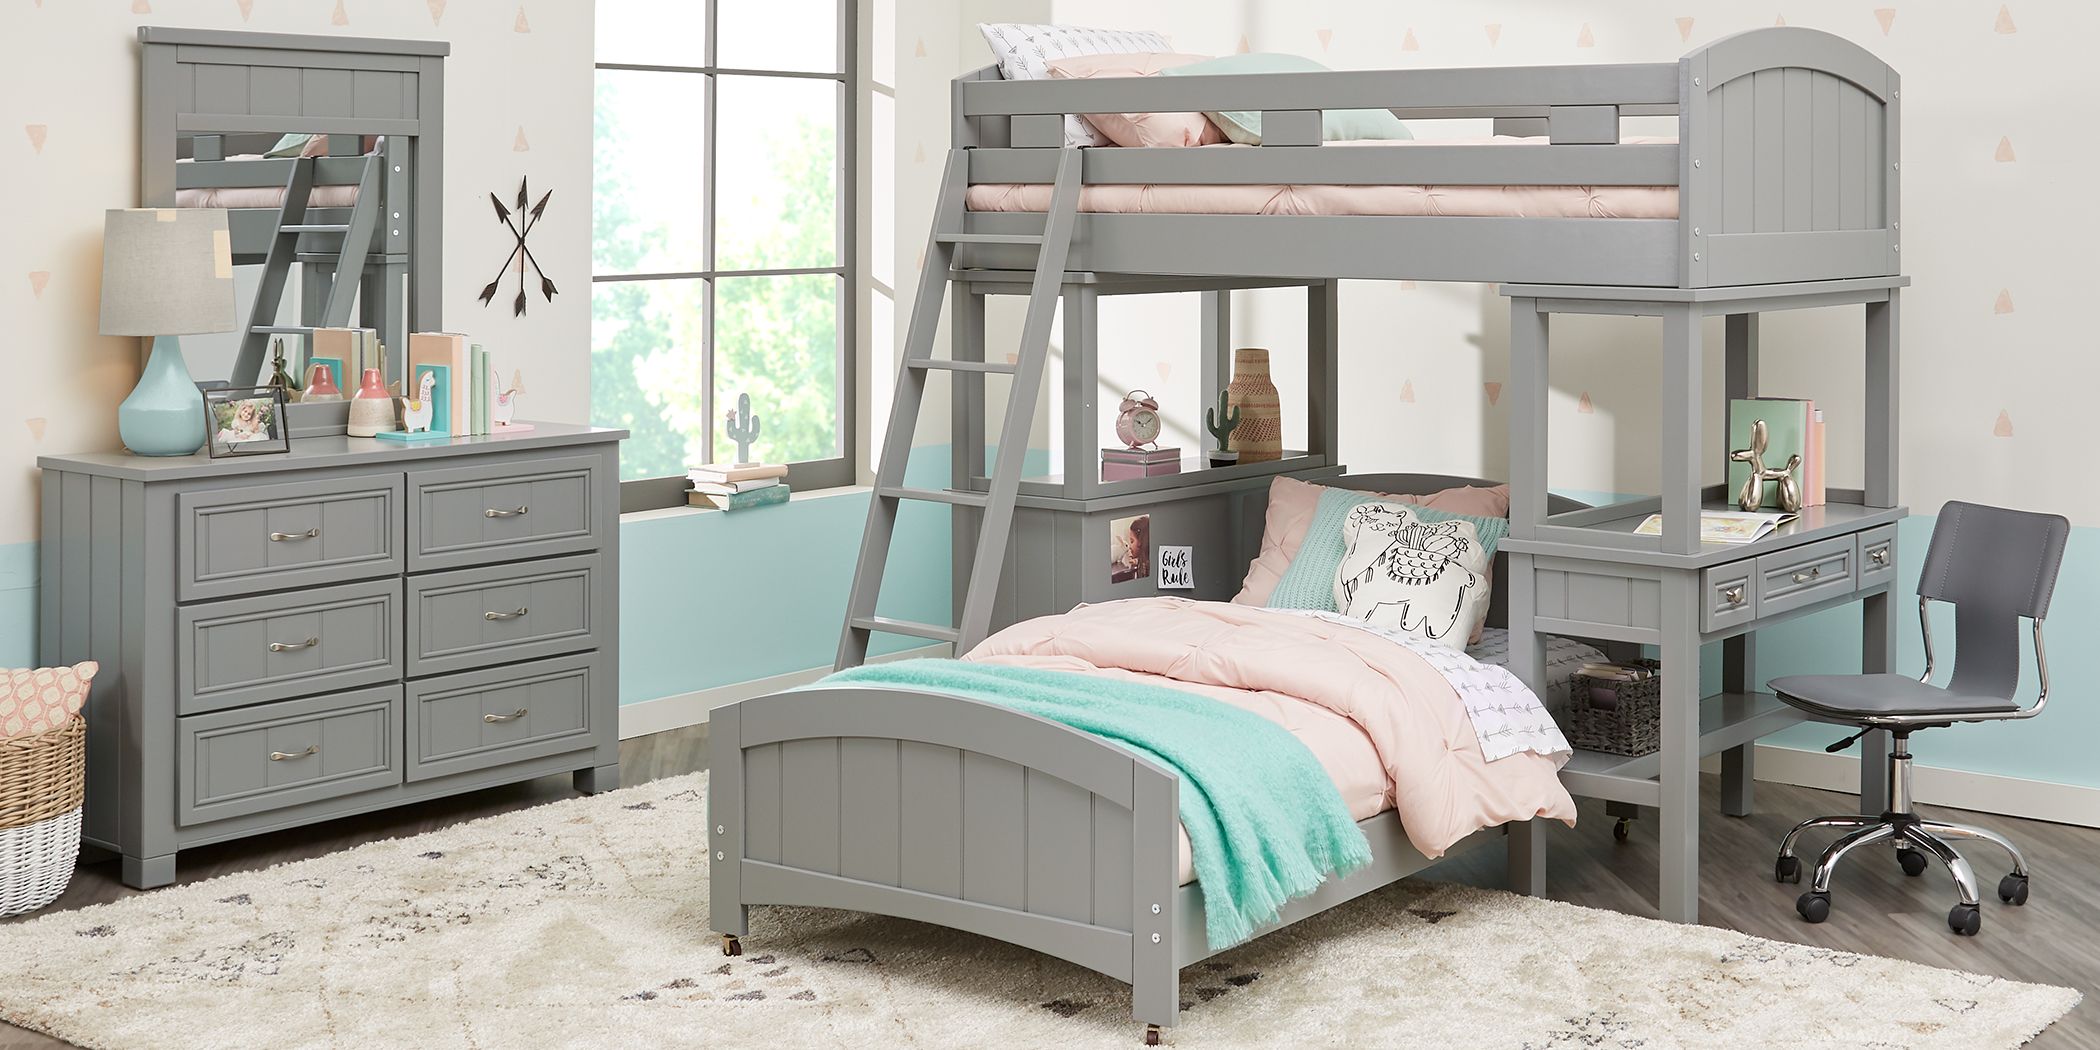 Bunk Beds With Desk Underneath, Twin Loft Bed With Desk And Dresser